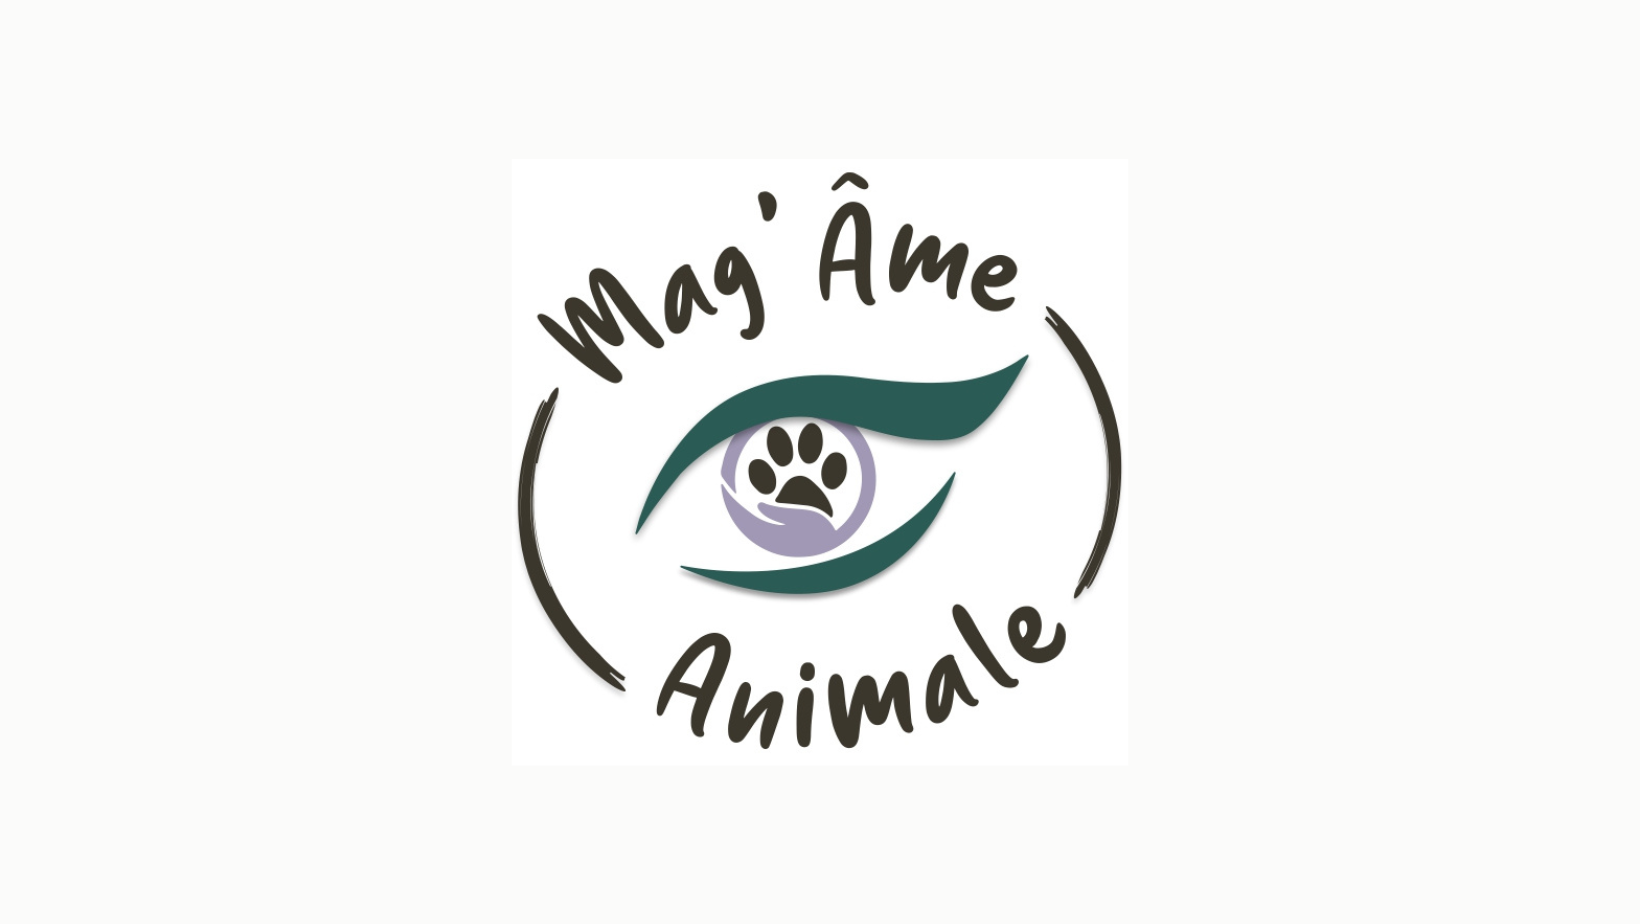 Mag Ame Animale